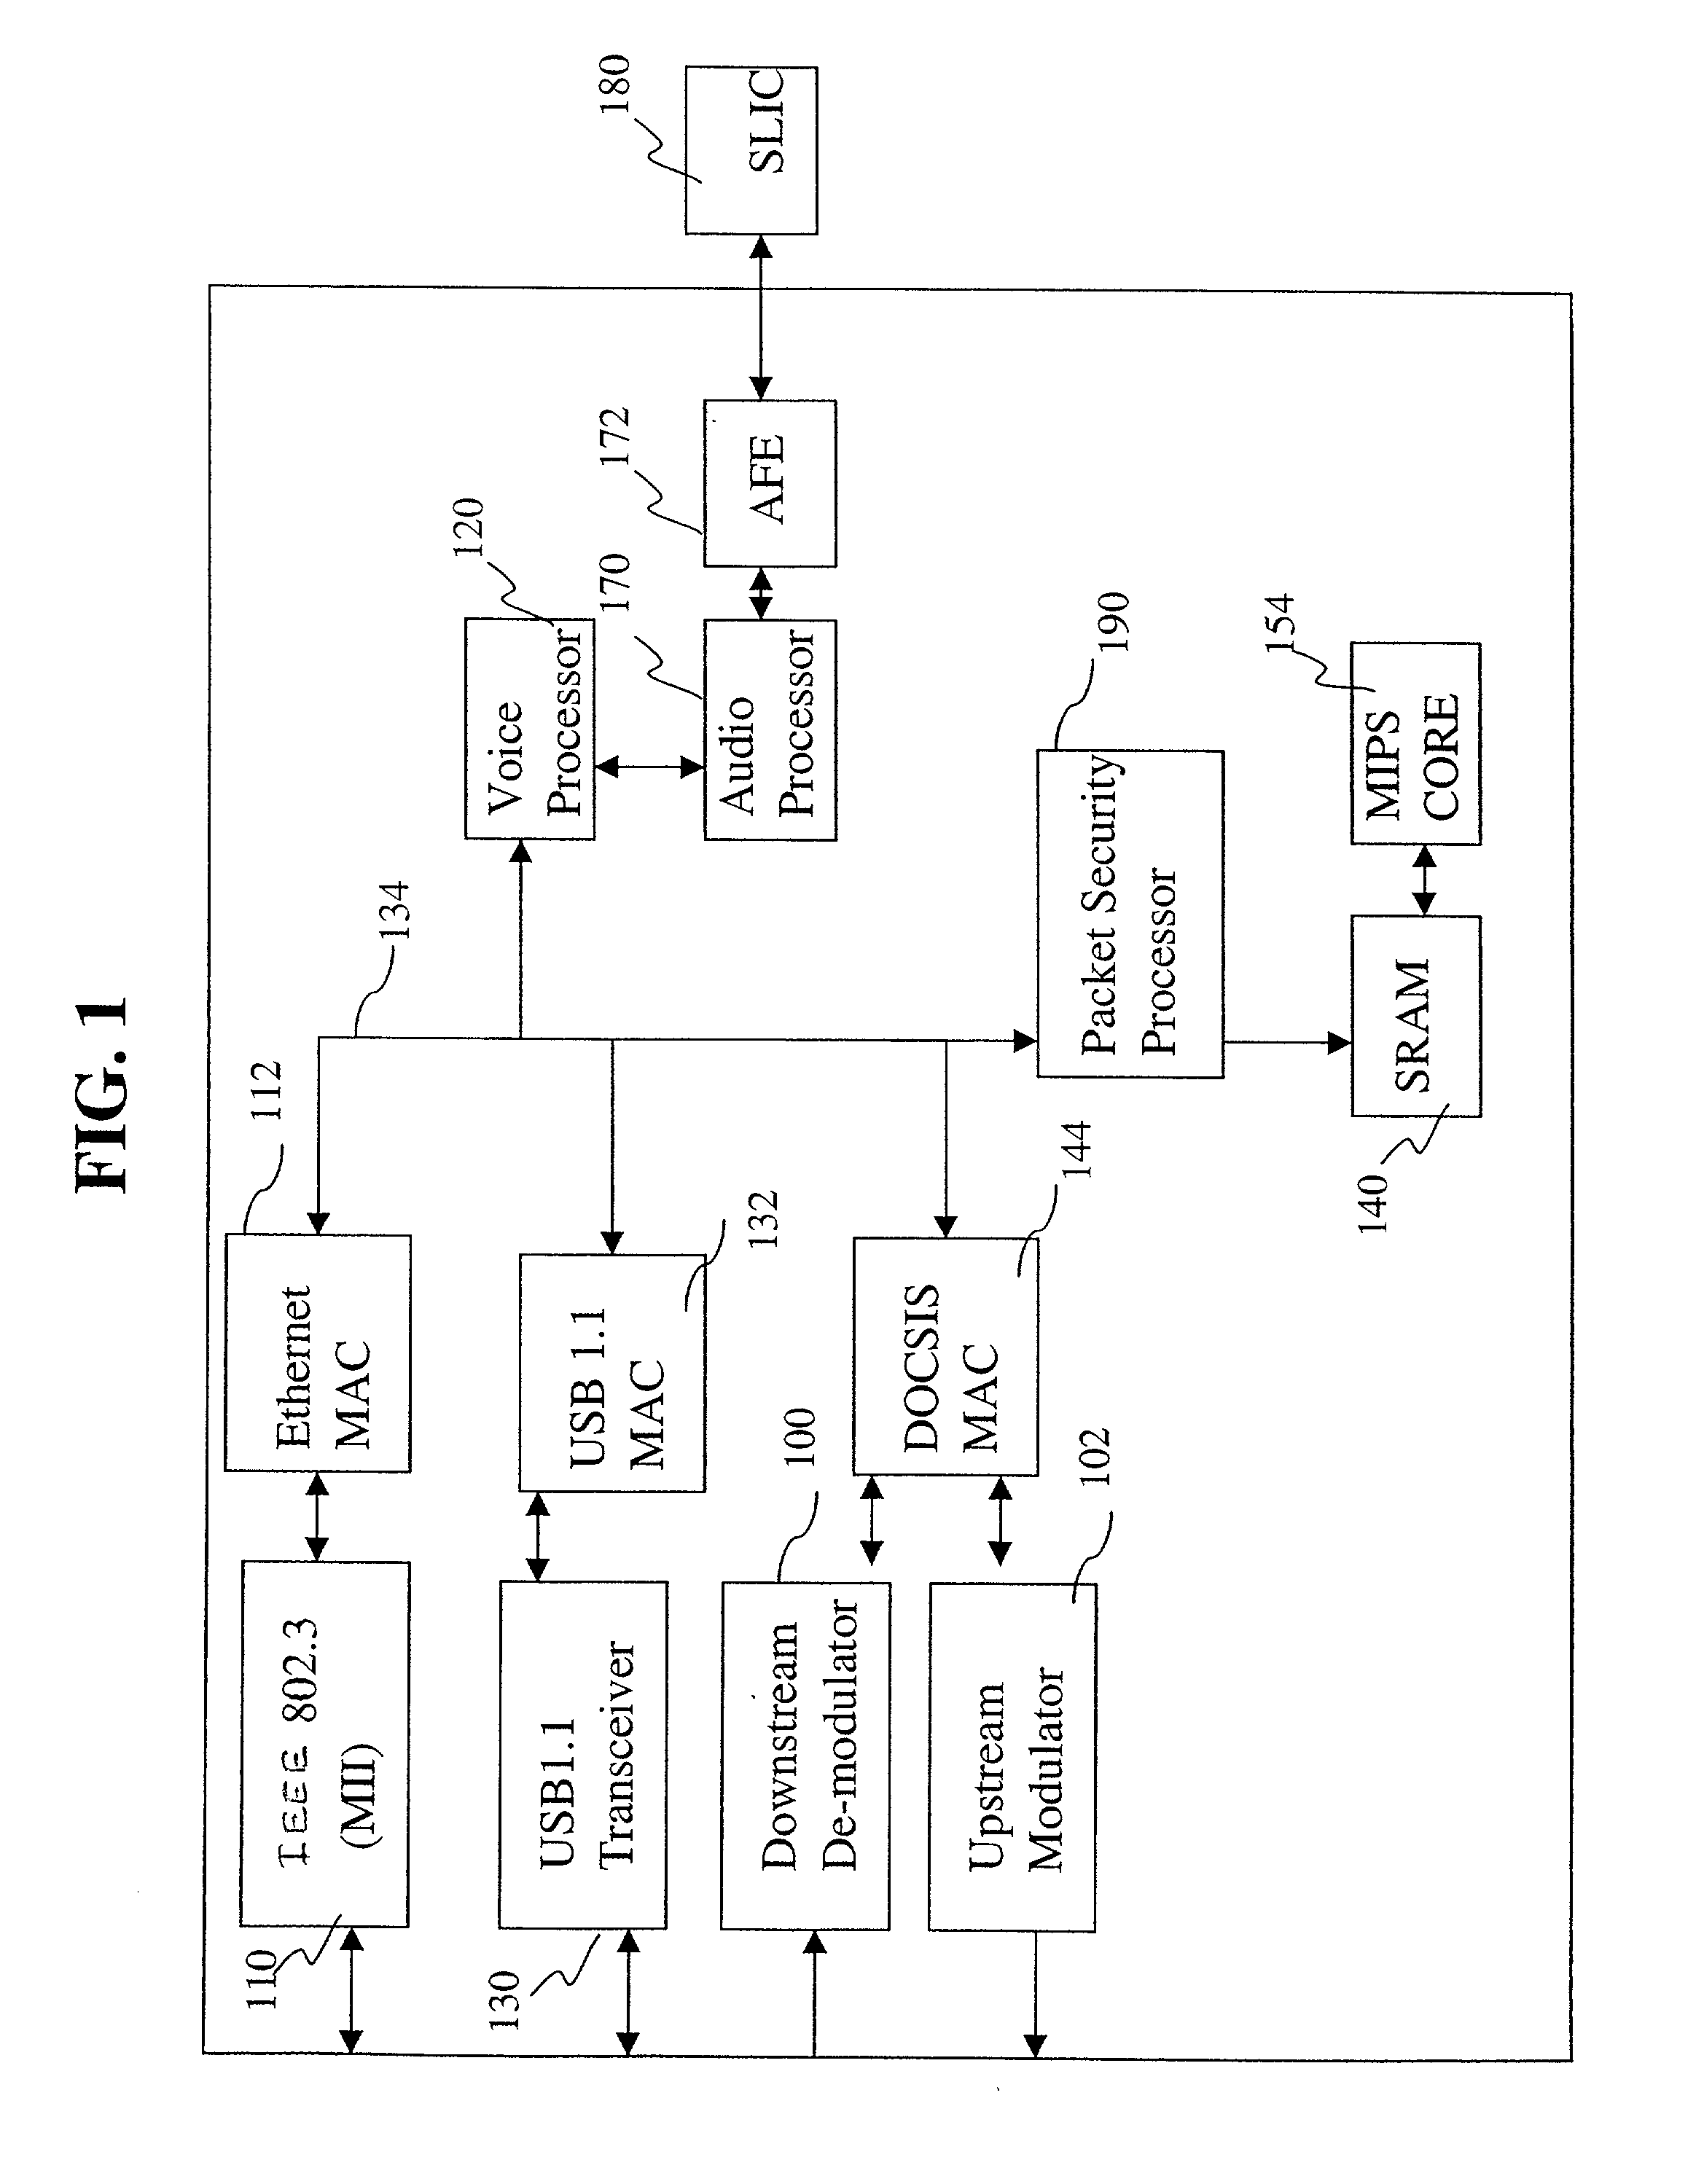 Method for processing multiple security policies applied to a data packet structure